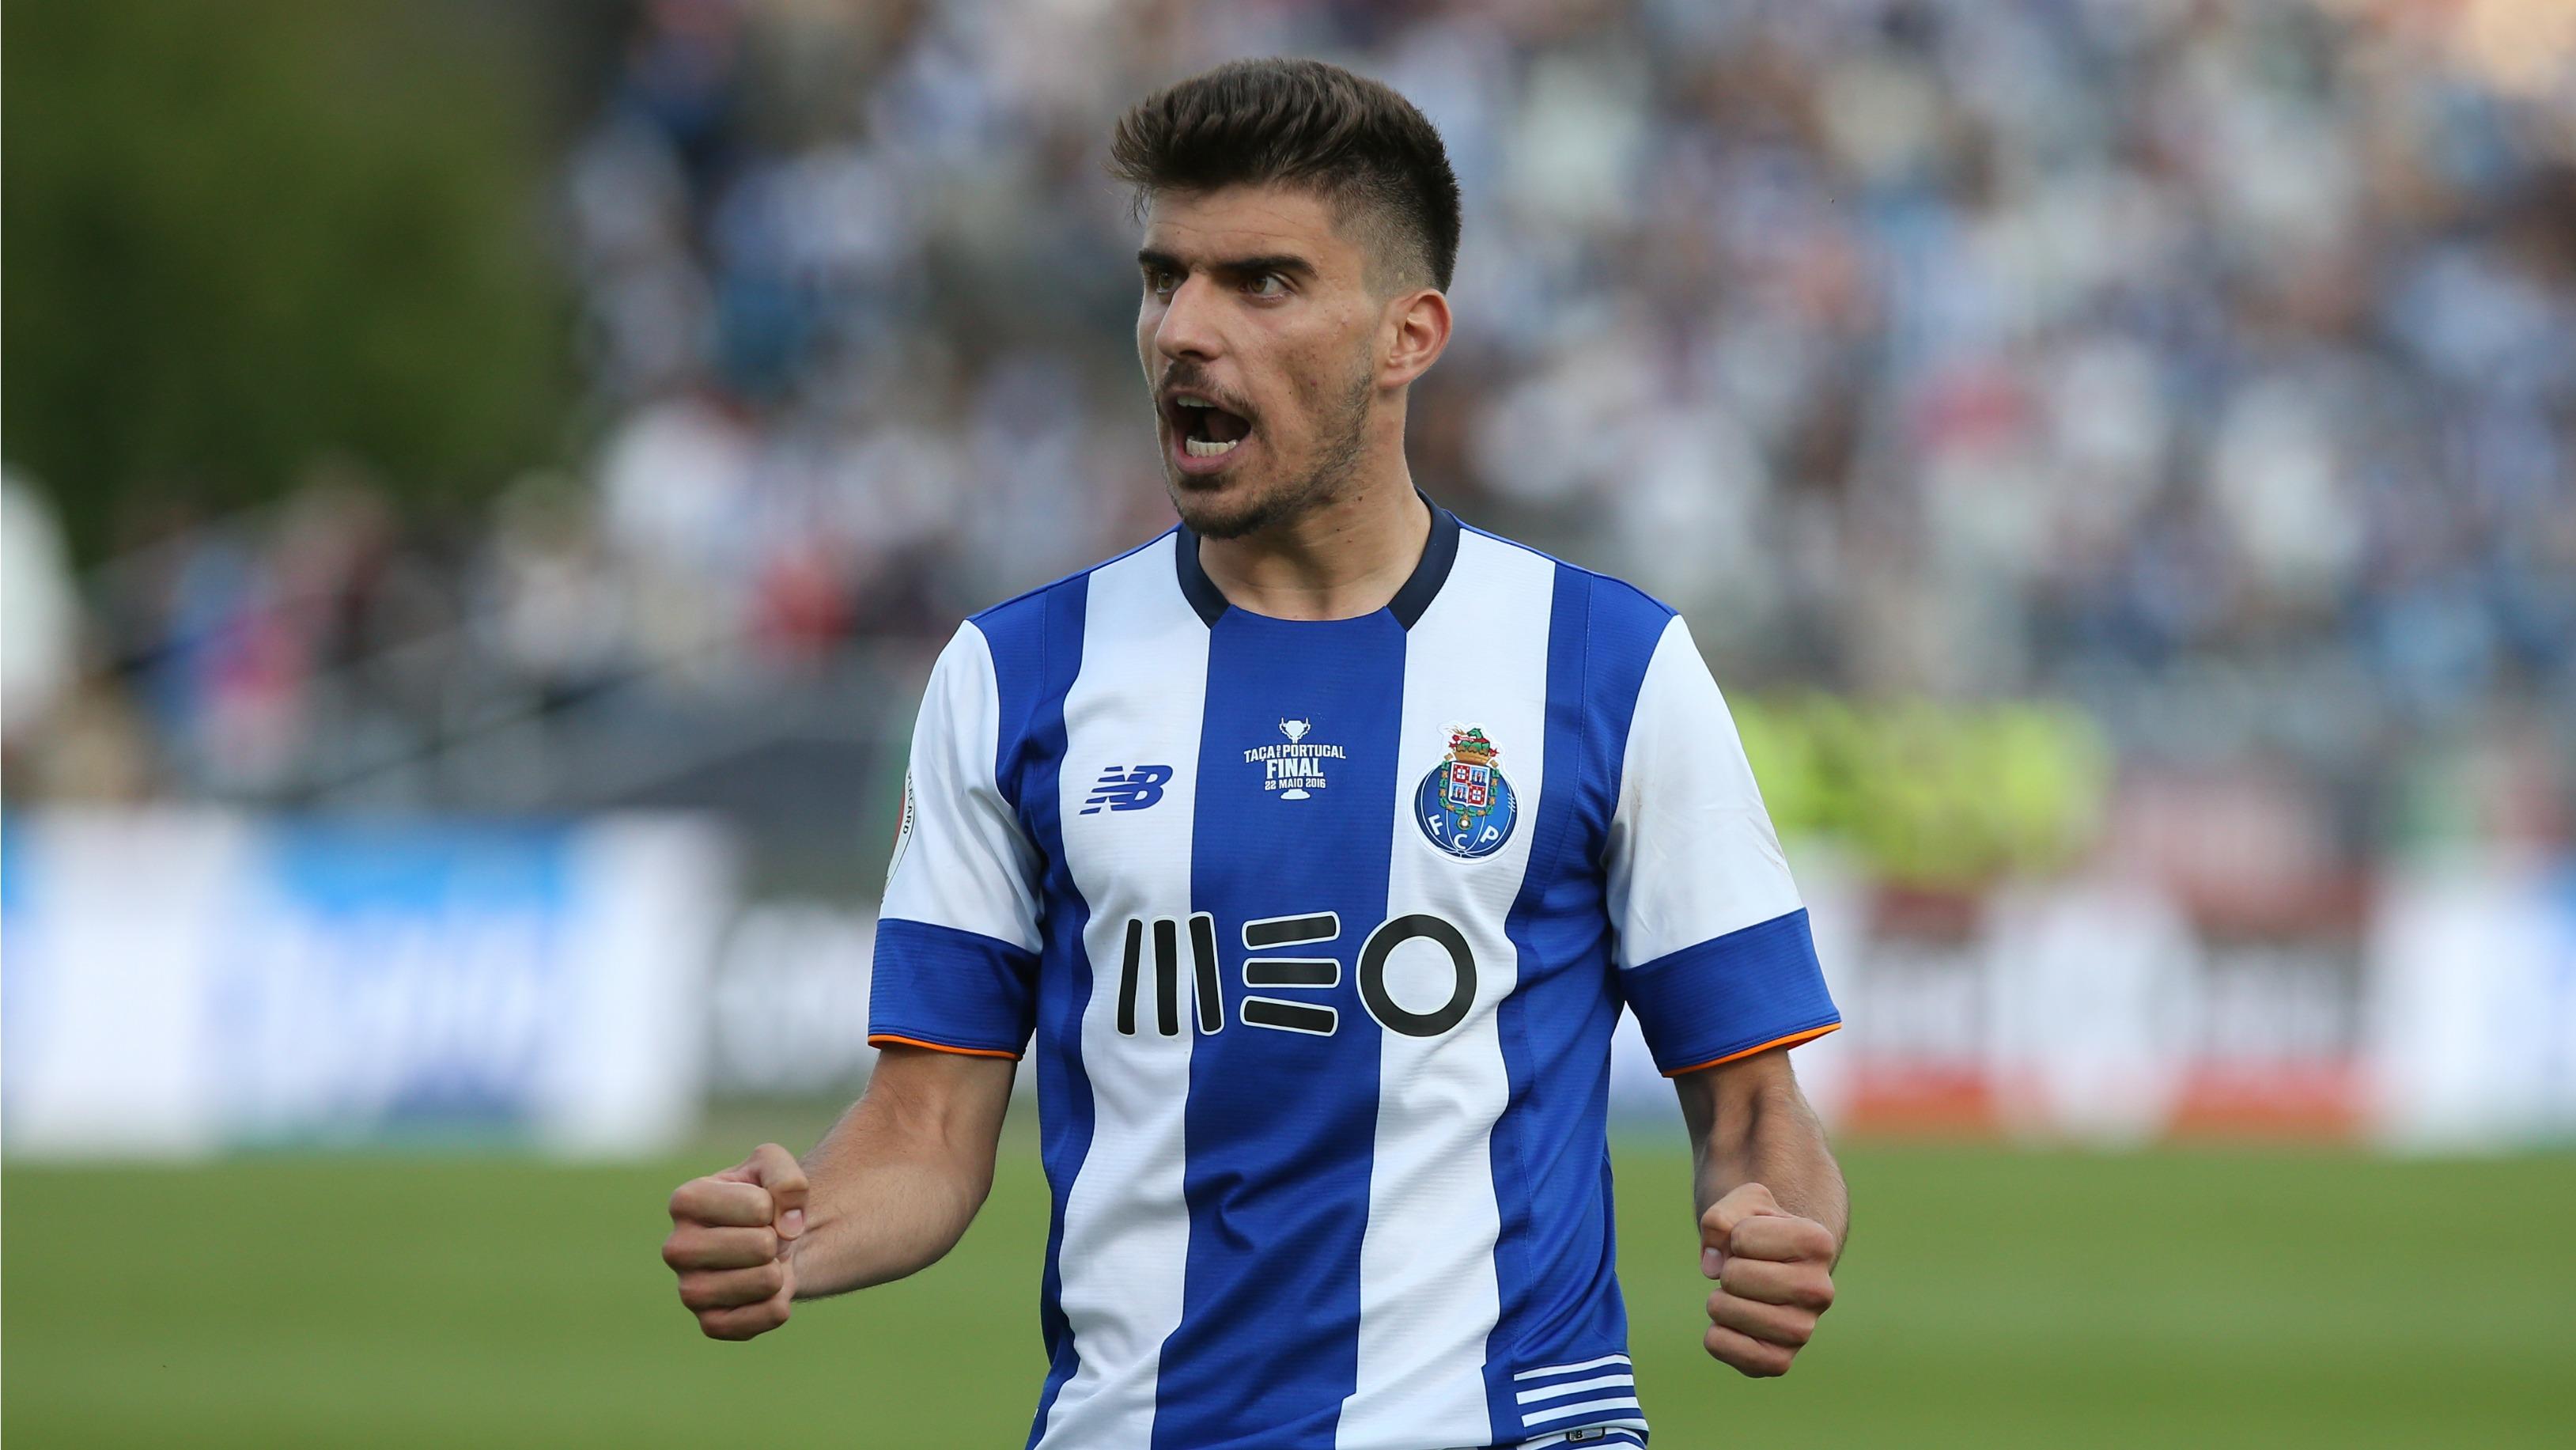 Watch This Porto Starlet Score An Incredible Double Sombrero Volley